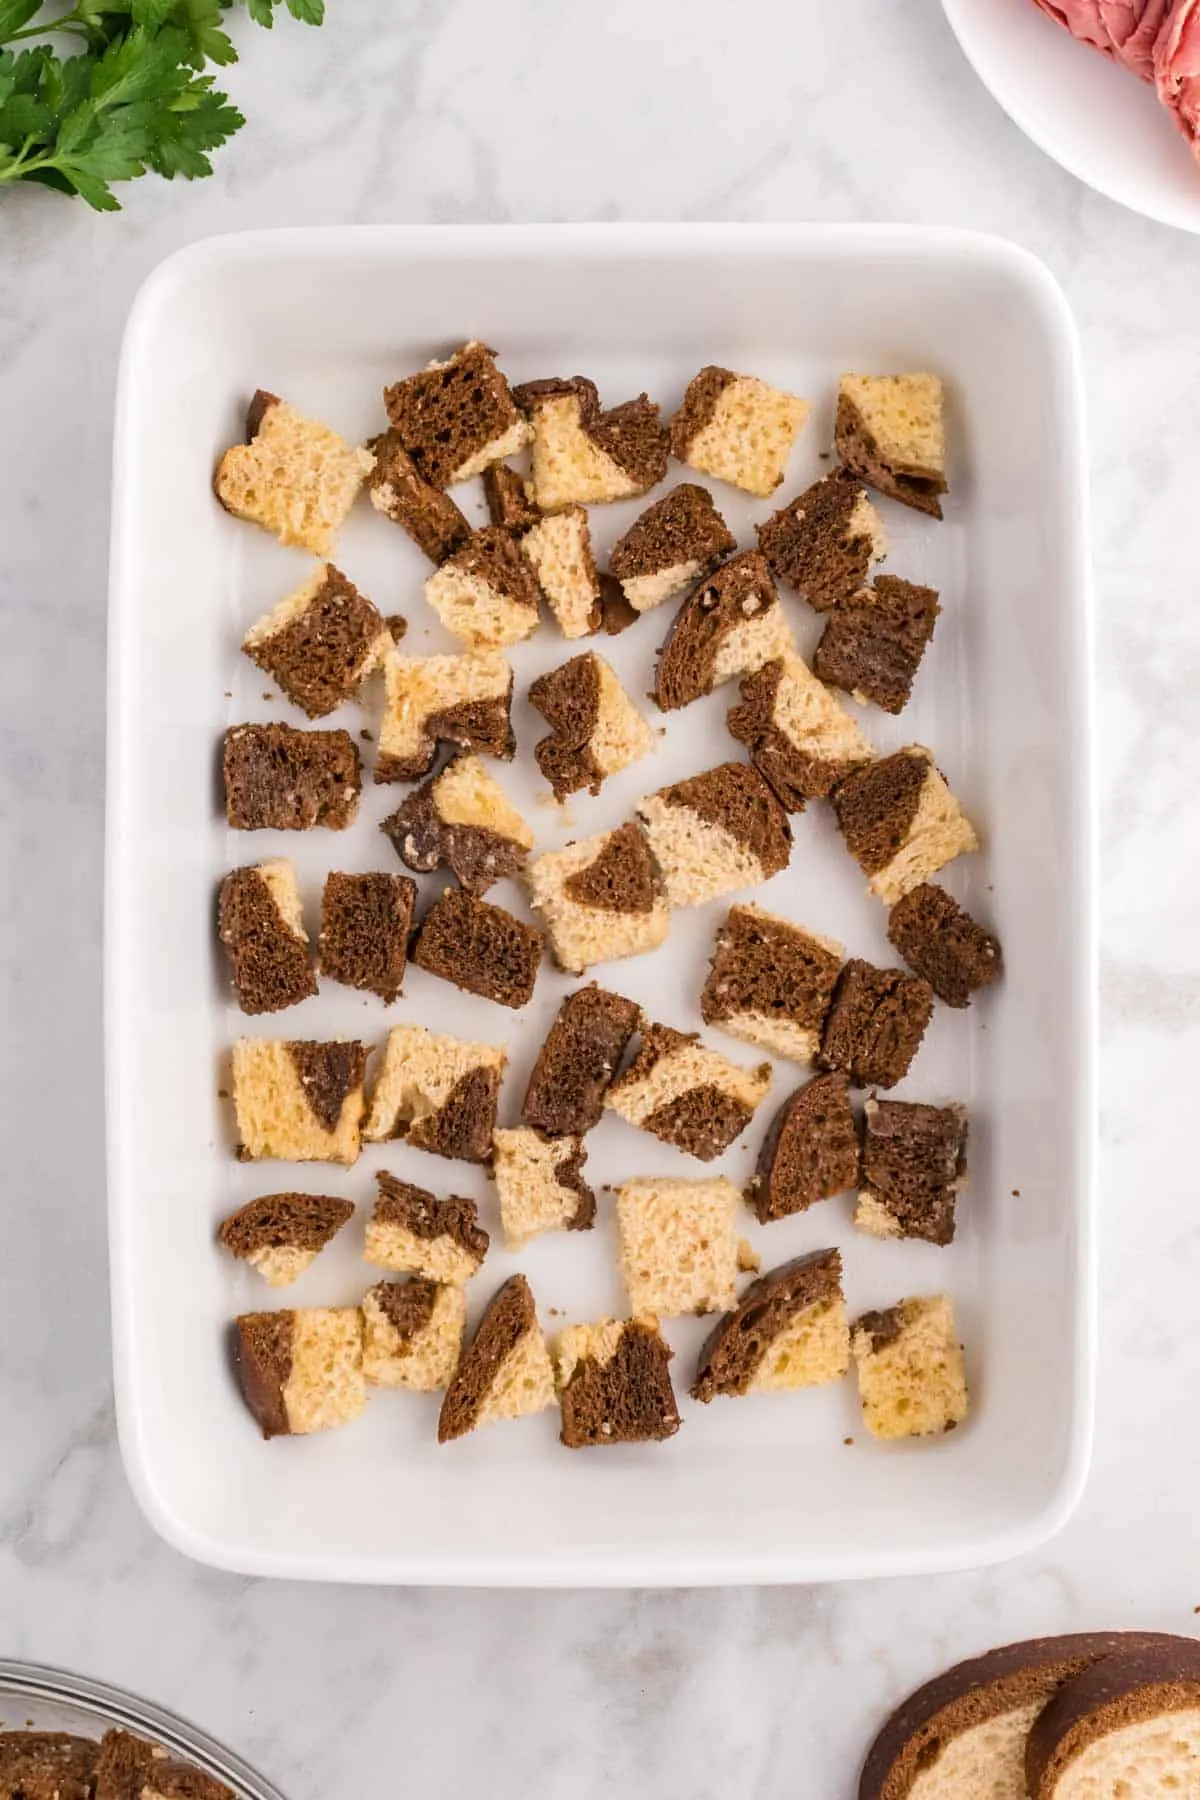 cubes of marble rye bread in the bottom of a a baking dish